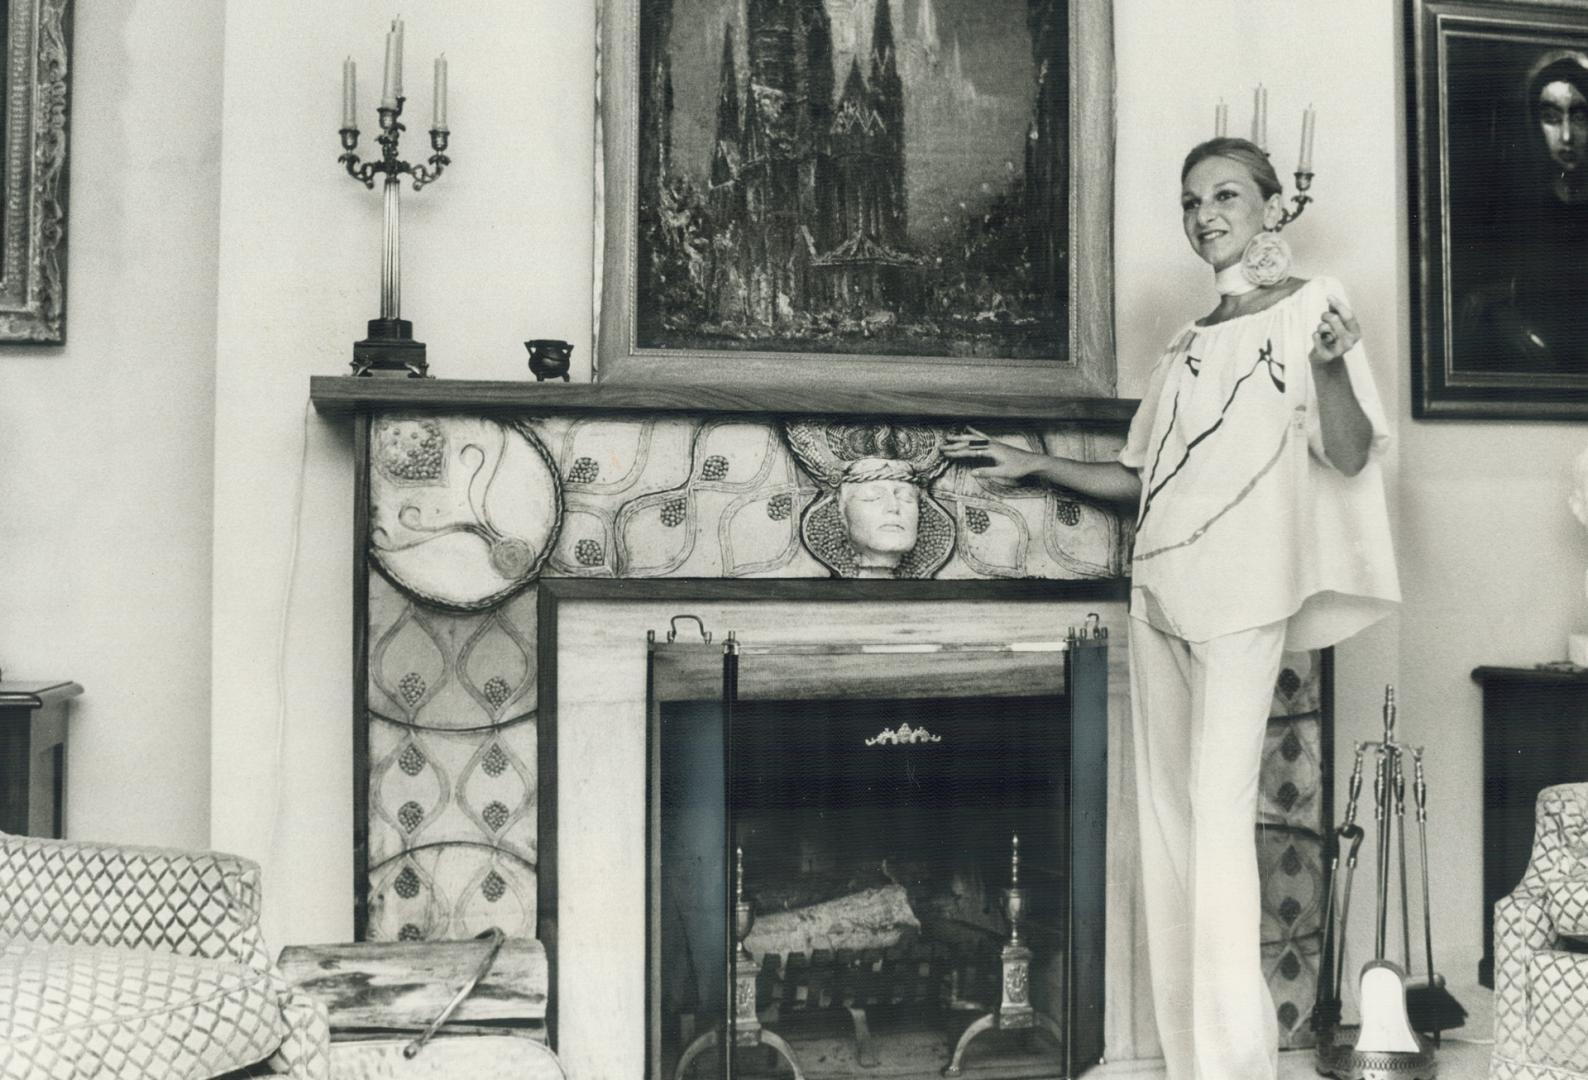 Standing beside the fireplace she designed, in the George Benjamin home on Parklane Circle, Susan Ancerl wears another Ancerl original - an outfit she(...)